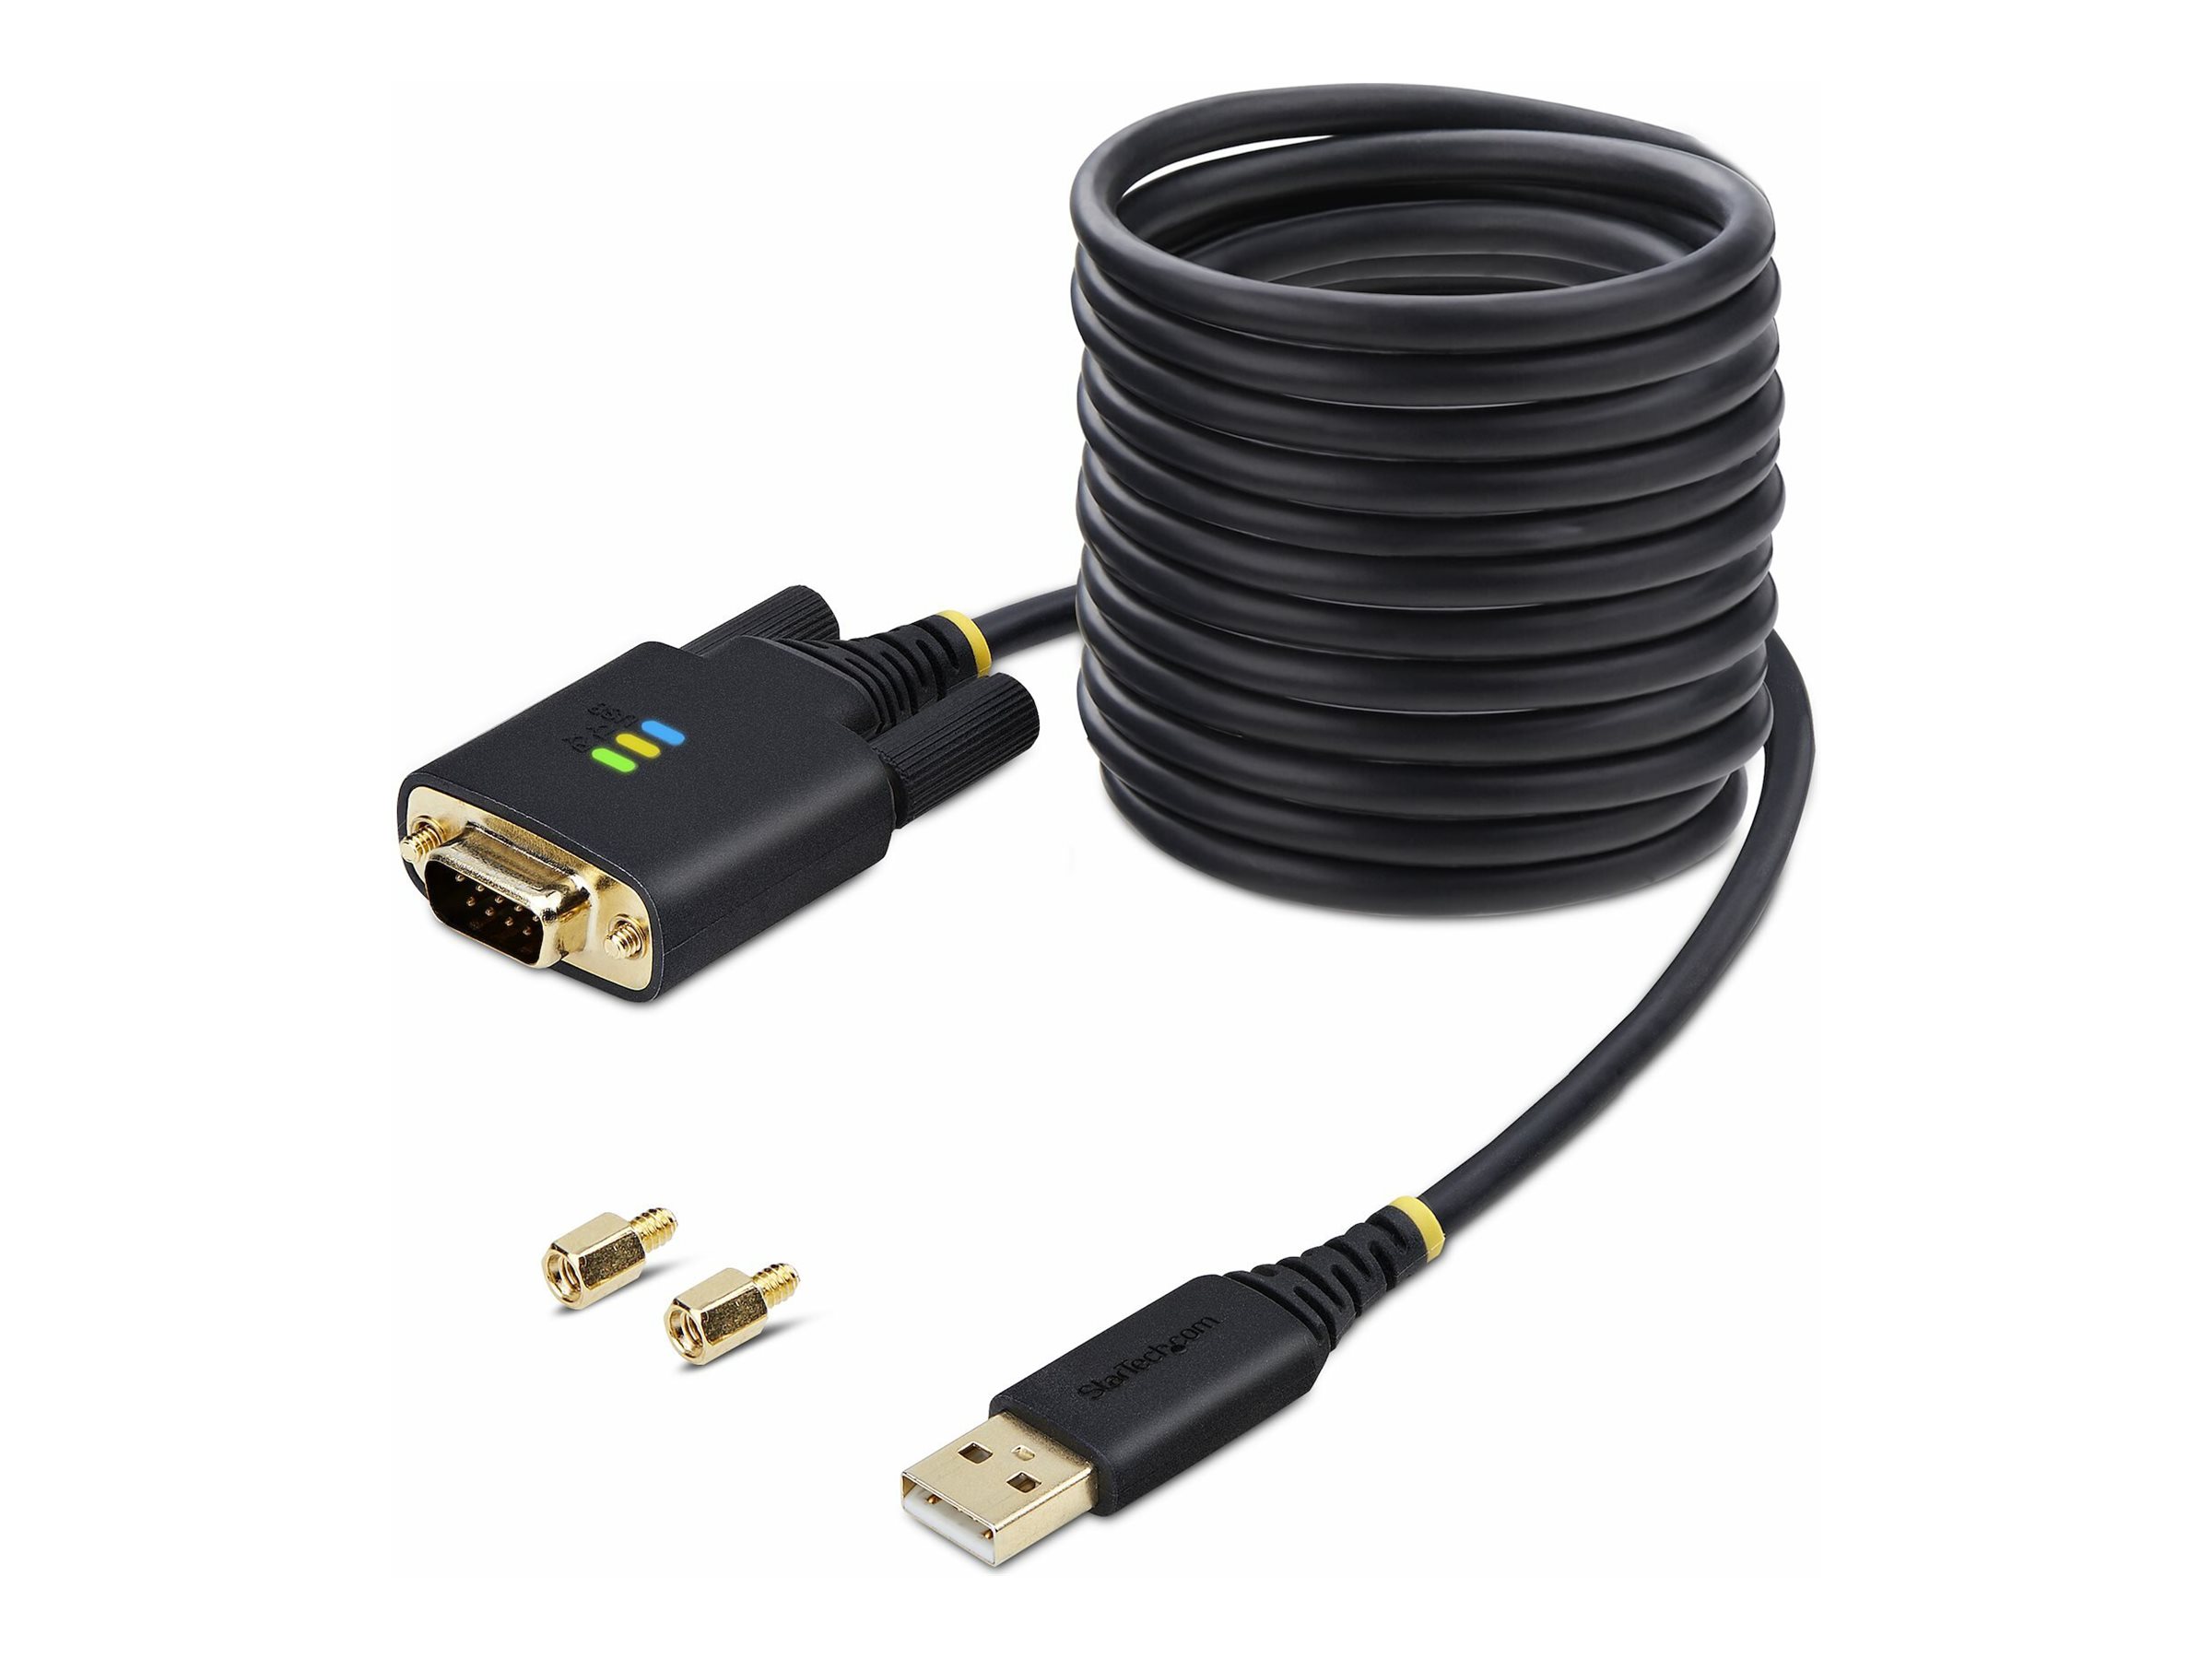 StarTech.com 10ft (3m) USB to Serial Adapter Cable, Interchangeable DB9 Screws/Nuts, COM Retention, USB-A to DB9 RS232, FTDI IC, Level-4 ESD Protection, Windows/macOS/ChromeOS/Linux - Rugged TPE Construction (1P10FFC-USB-SERIAL) - Câble USB / série - USB (M) pour DB-9 (M) - 3 m - noir - 1P10FFC-USB-SERIAL - Câbles USB